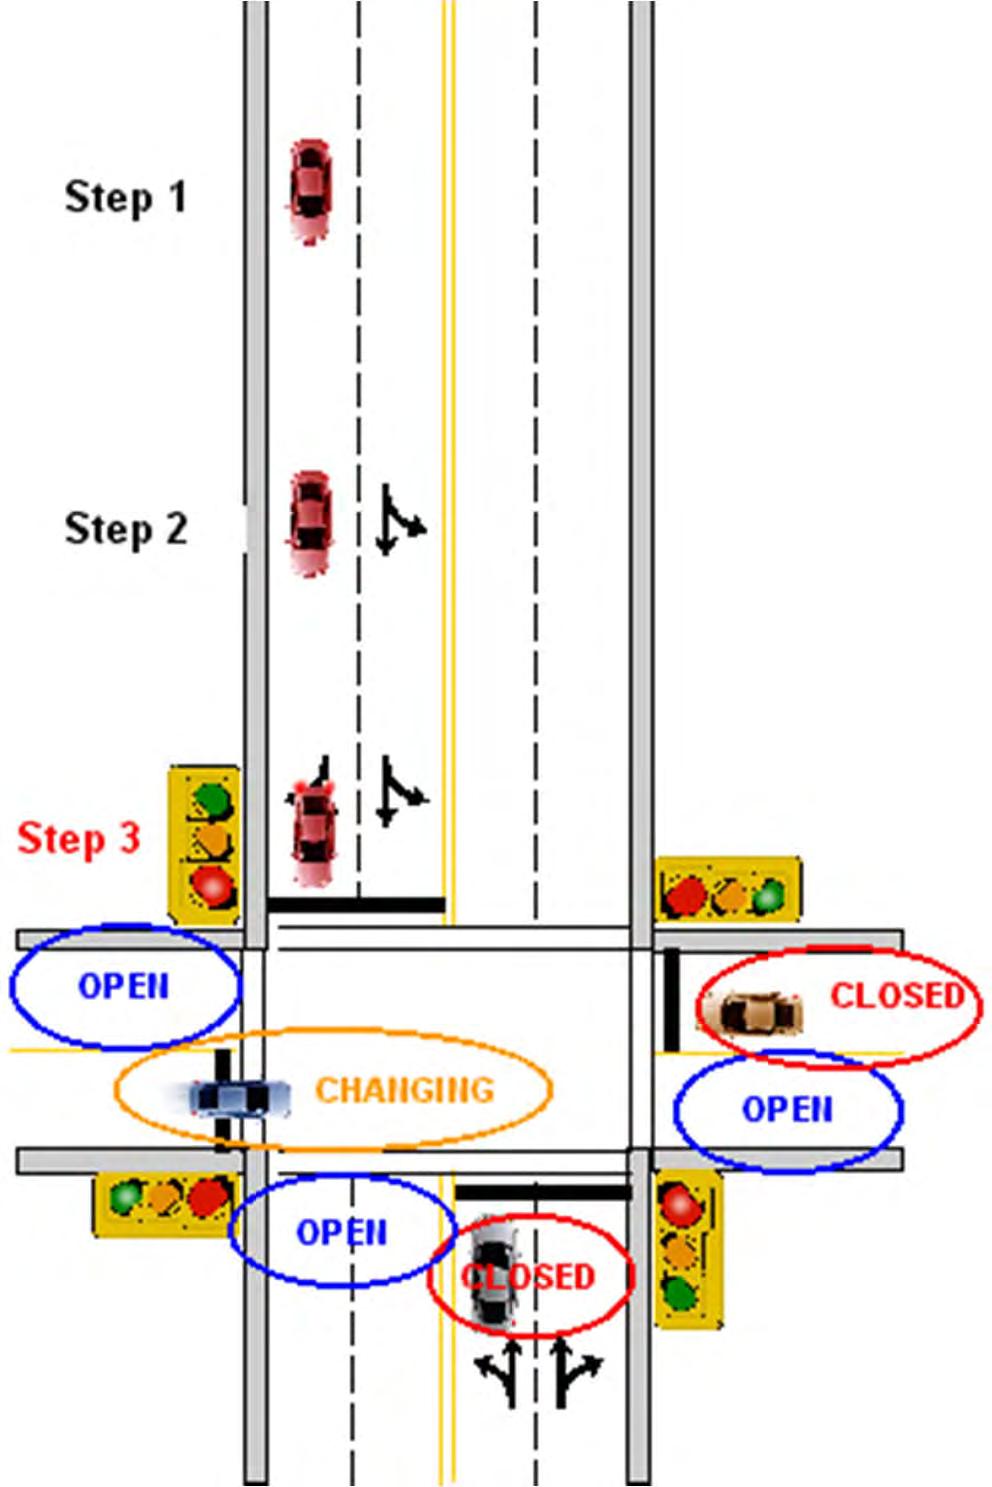 Topic 3 Lesson 2 Approach to Intersection Step 3 (Execute) Adjust speed. If you have identified a closed zone, prepare to reduce speed or stop. Maintain lane position.